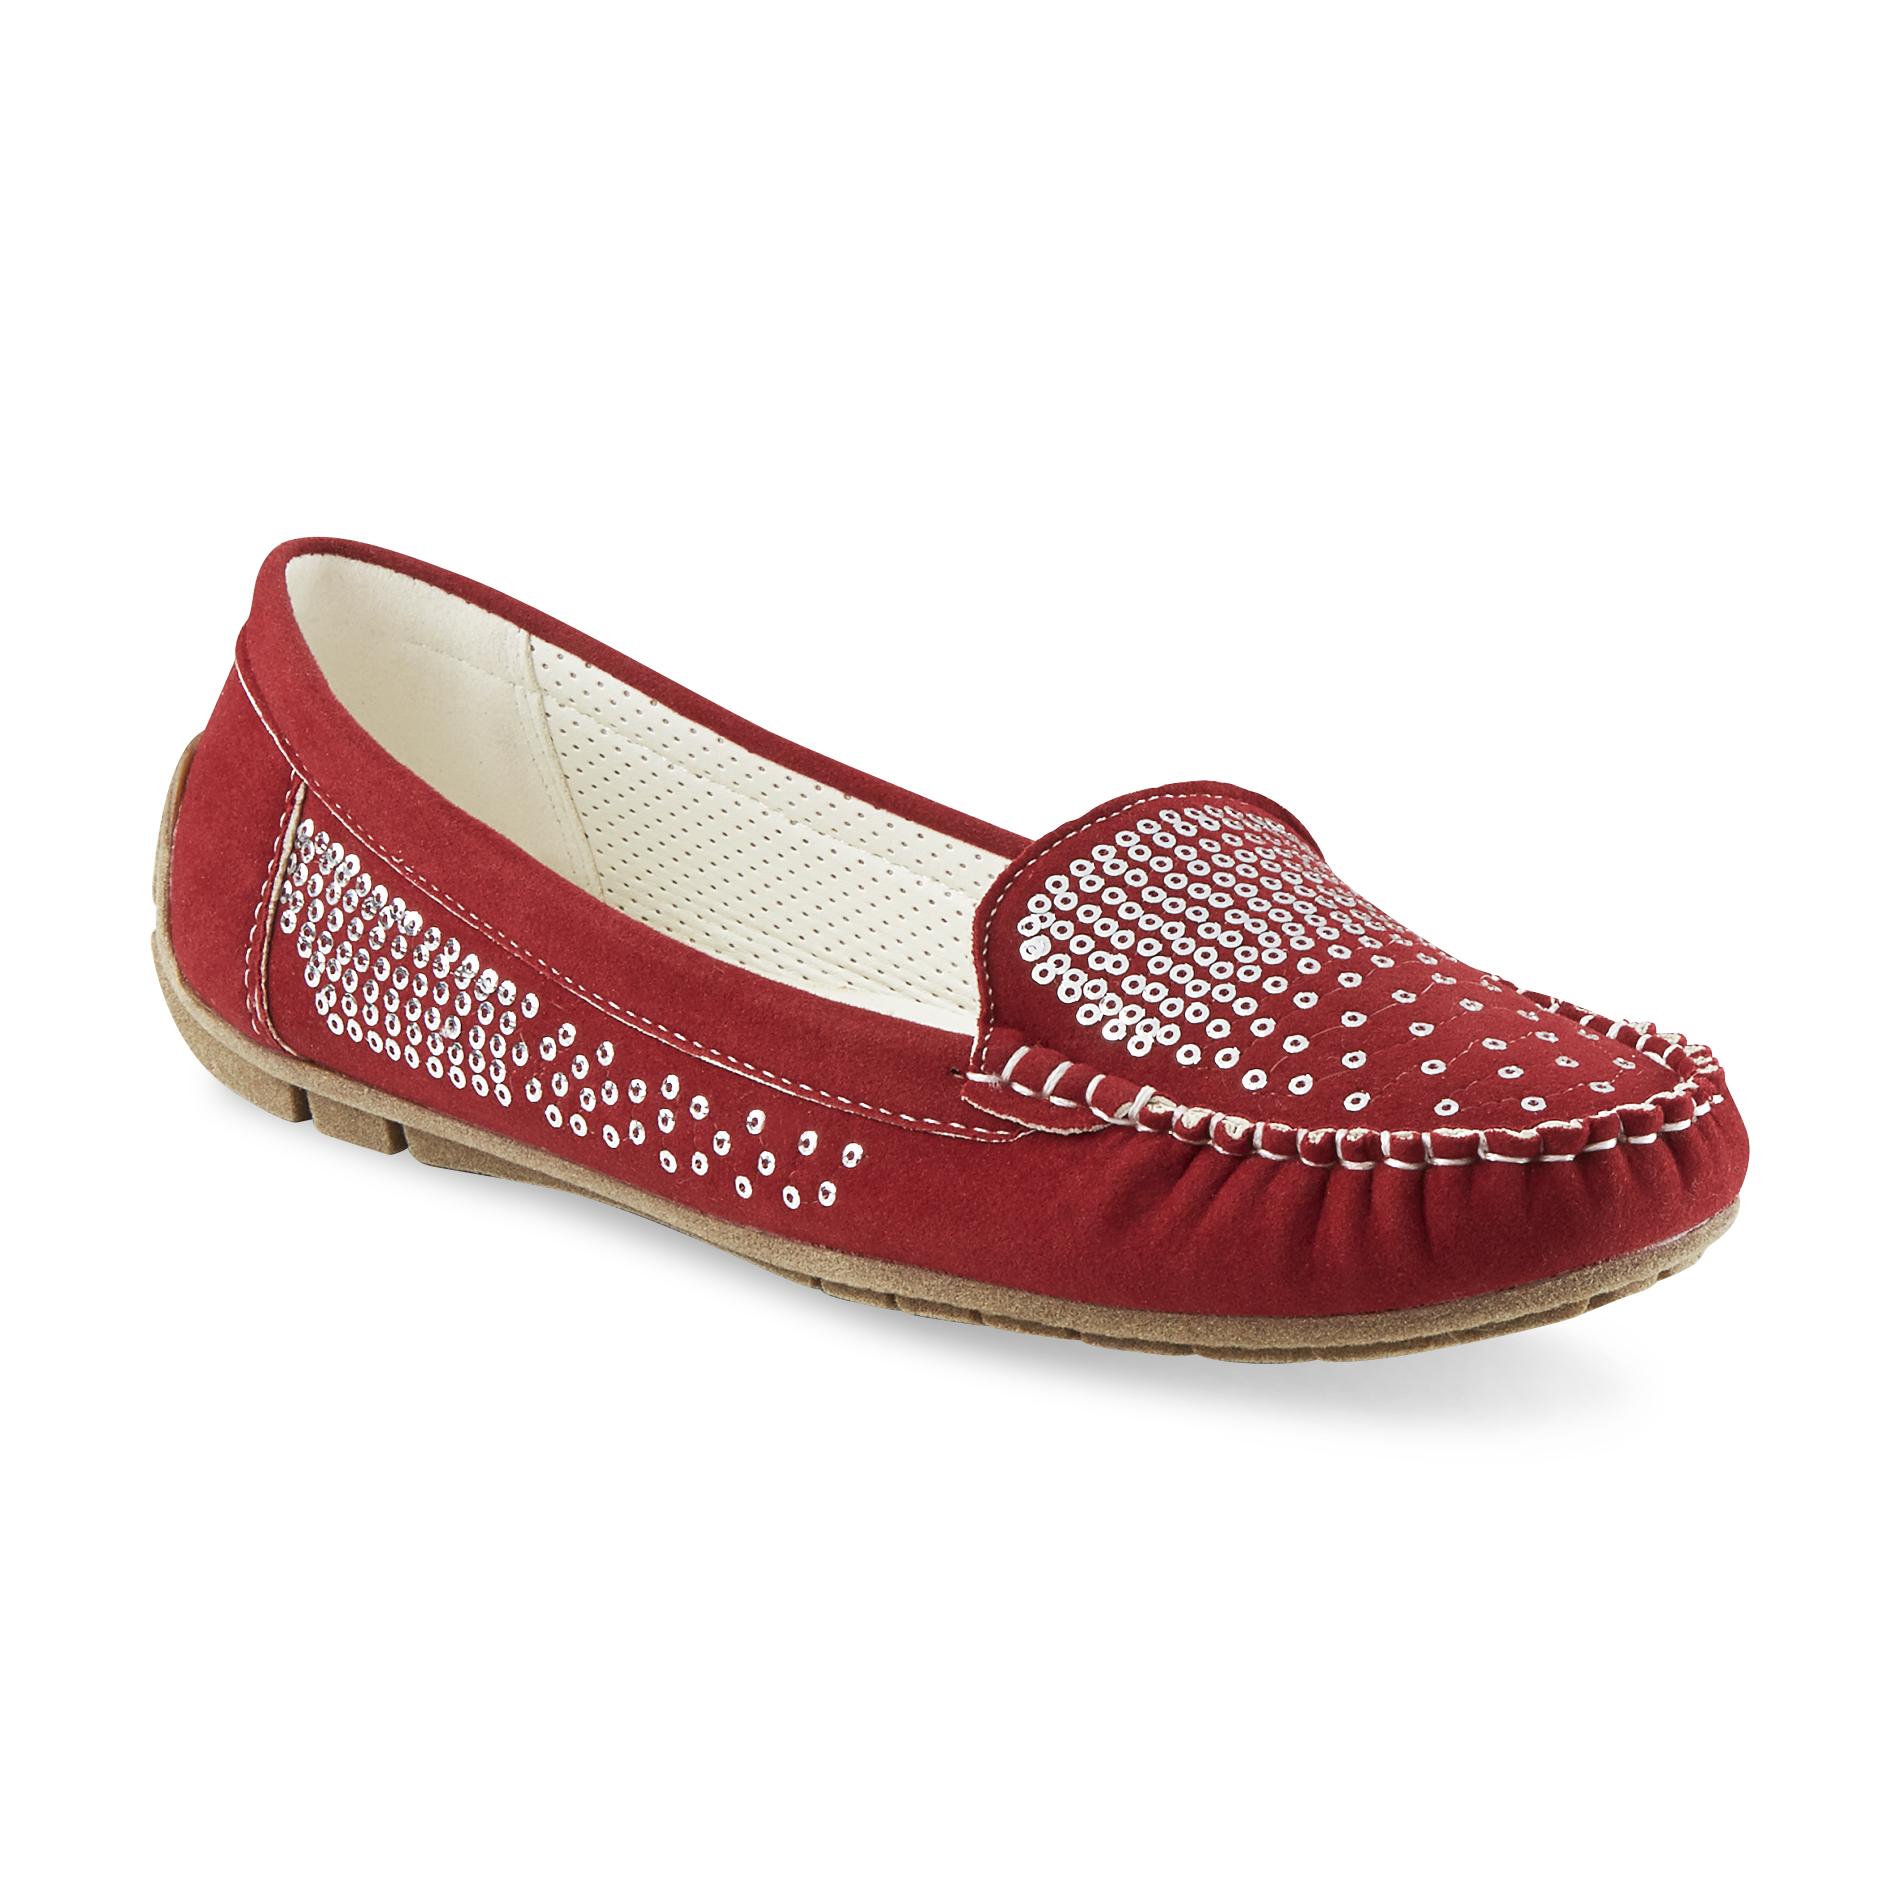 Italina Women's Donella Red Embellished Moccasin Flat